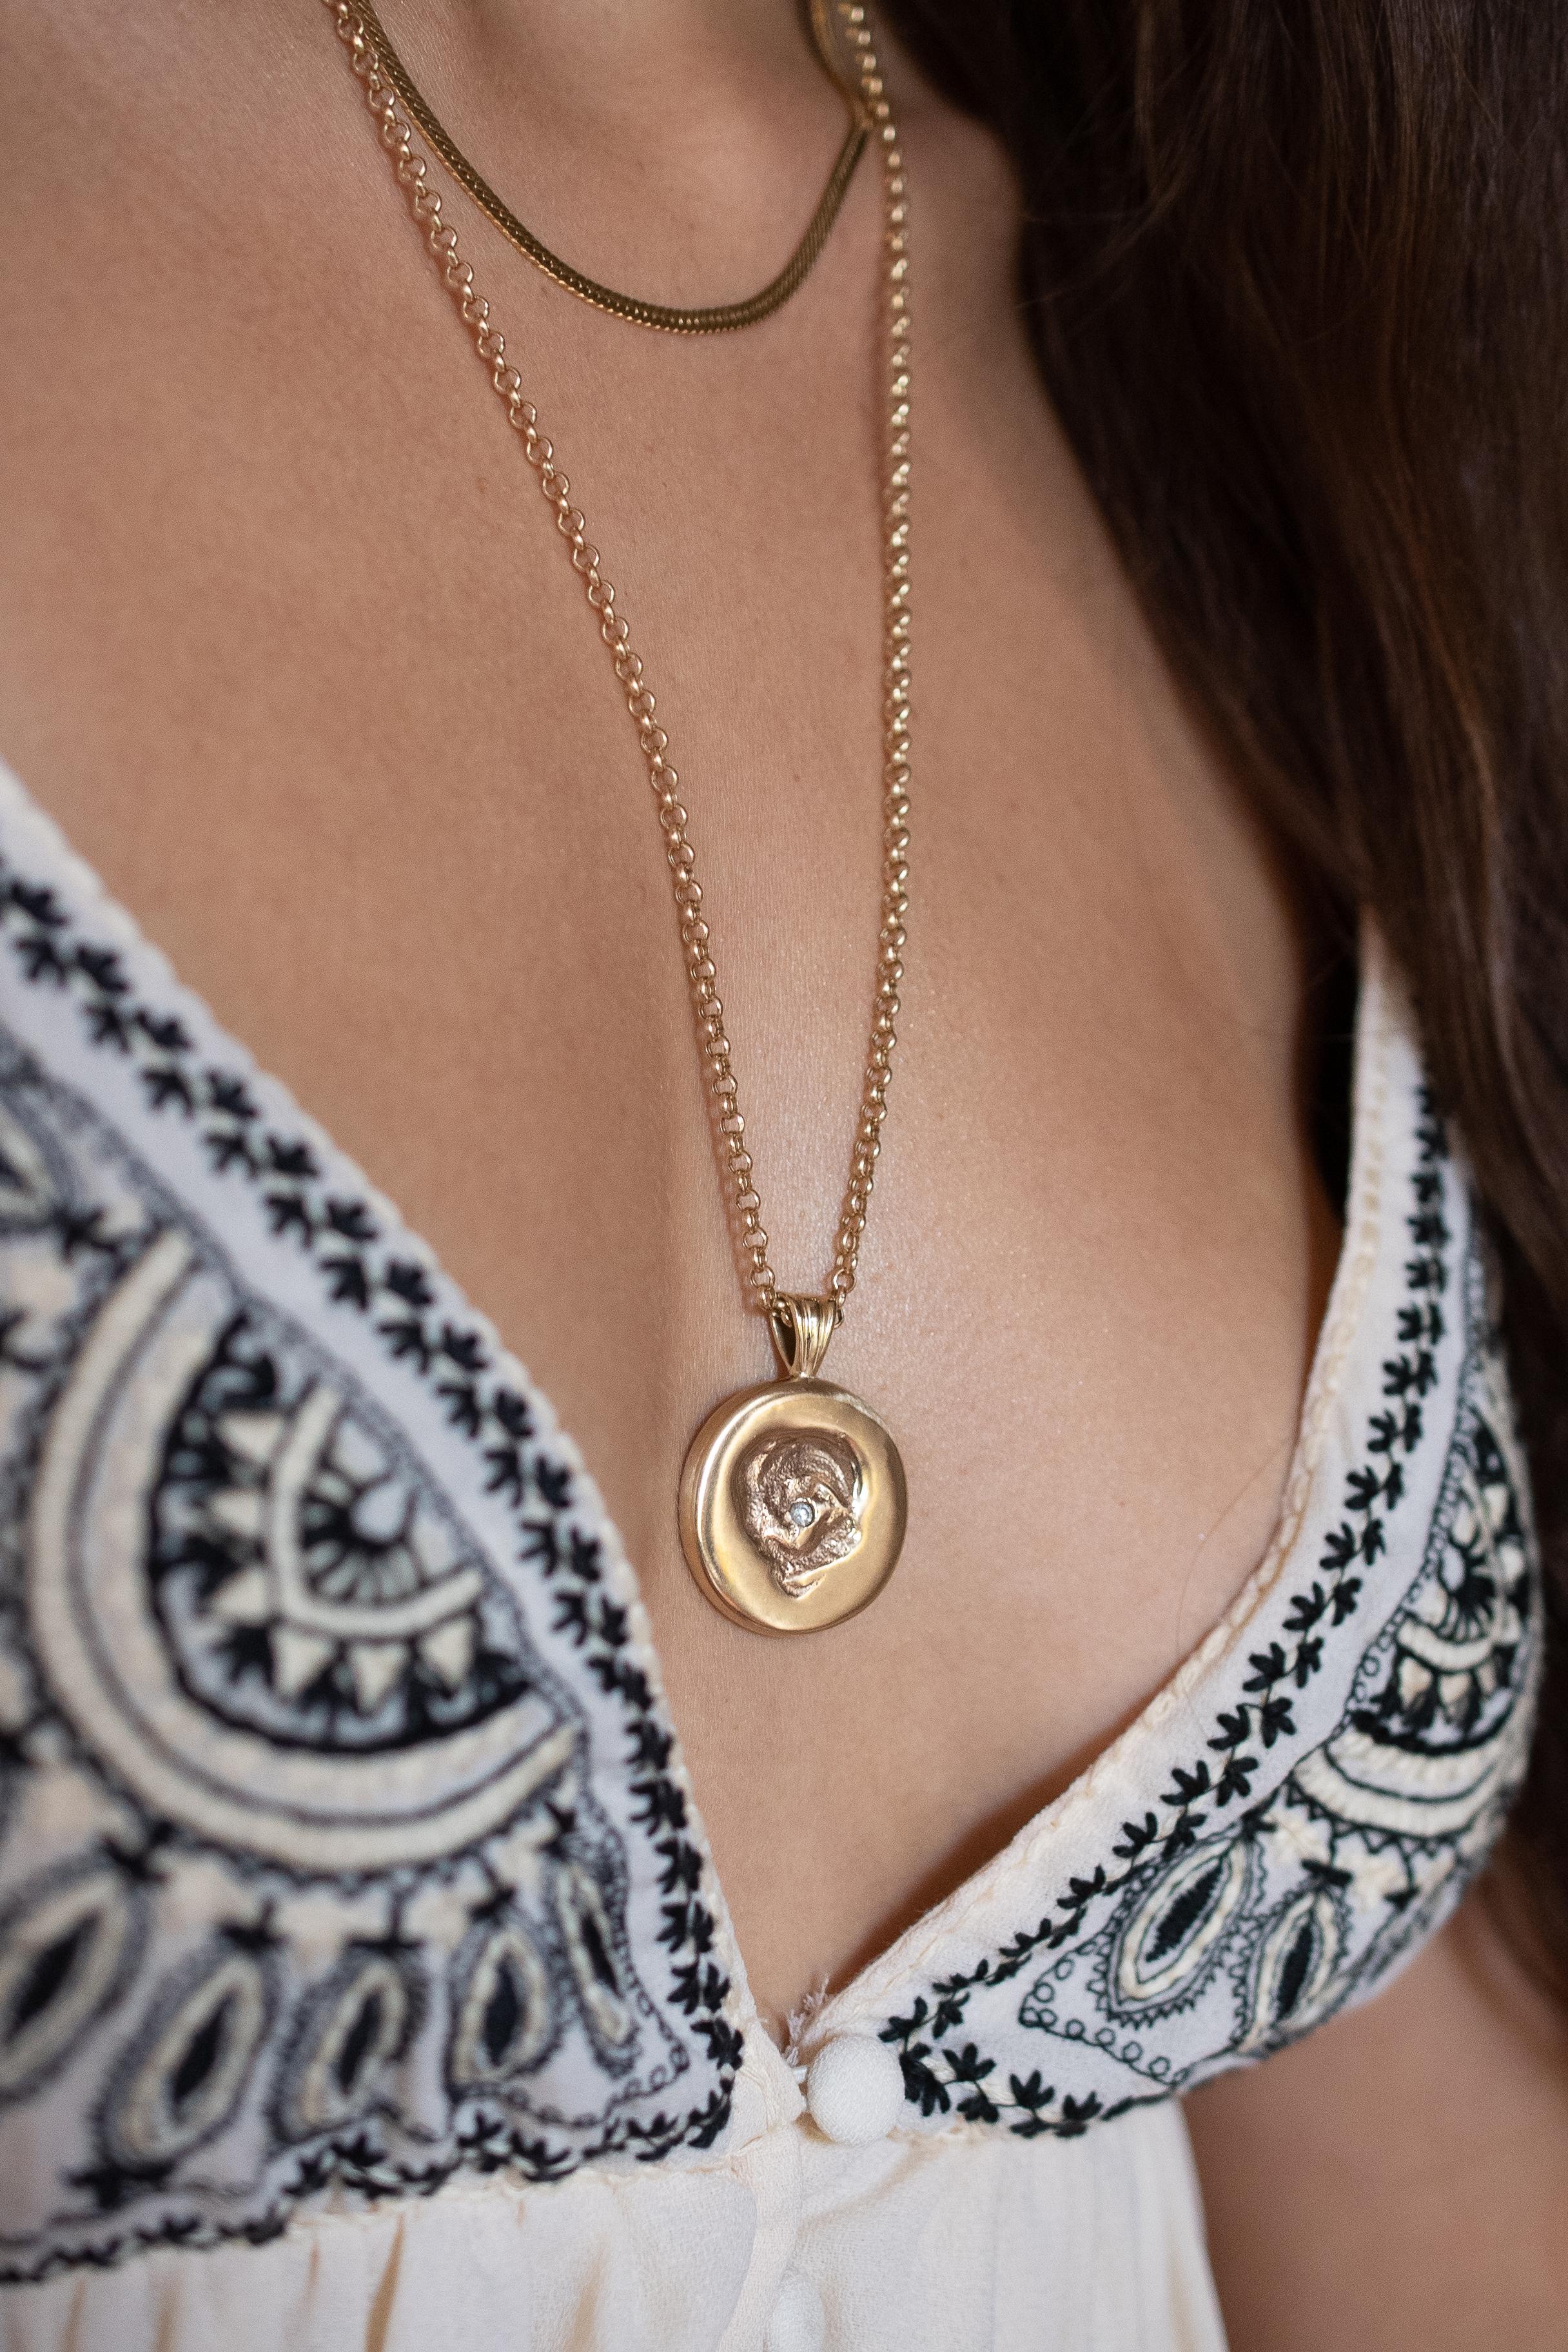 The Diamond Ostrea Necklace is handcrafted from 10K gold and diamonds in Brooklyn, New York by Latasha Lamar. This chain and pendant style necklace includes a rose-cut diamond.

Designed and created in New York by Latasha